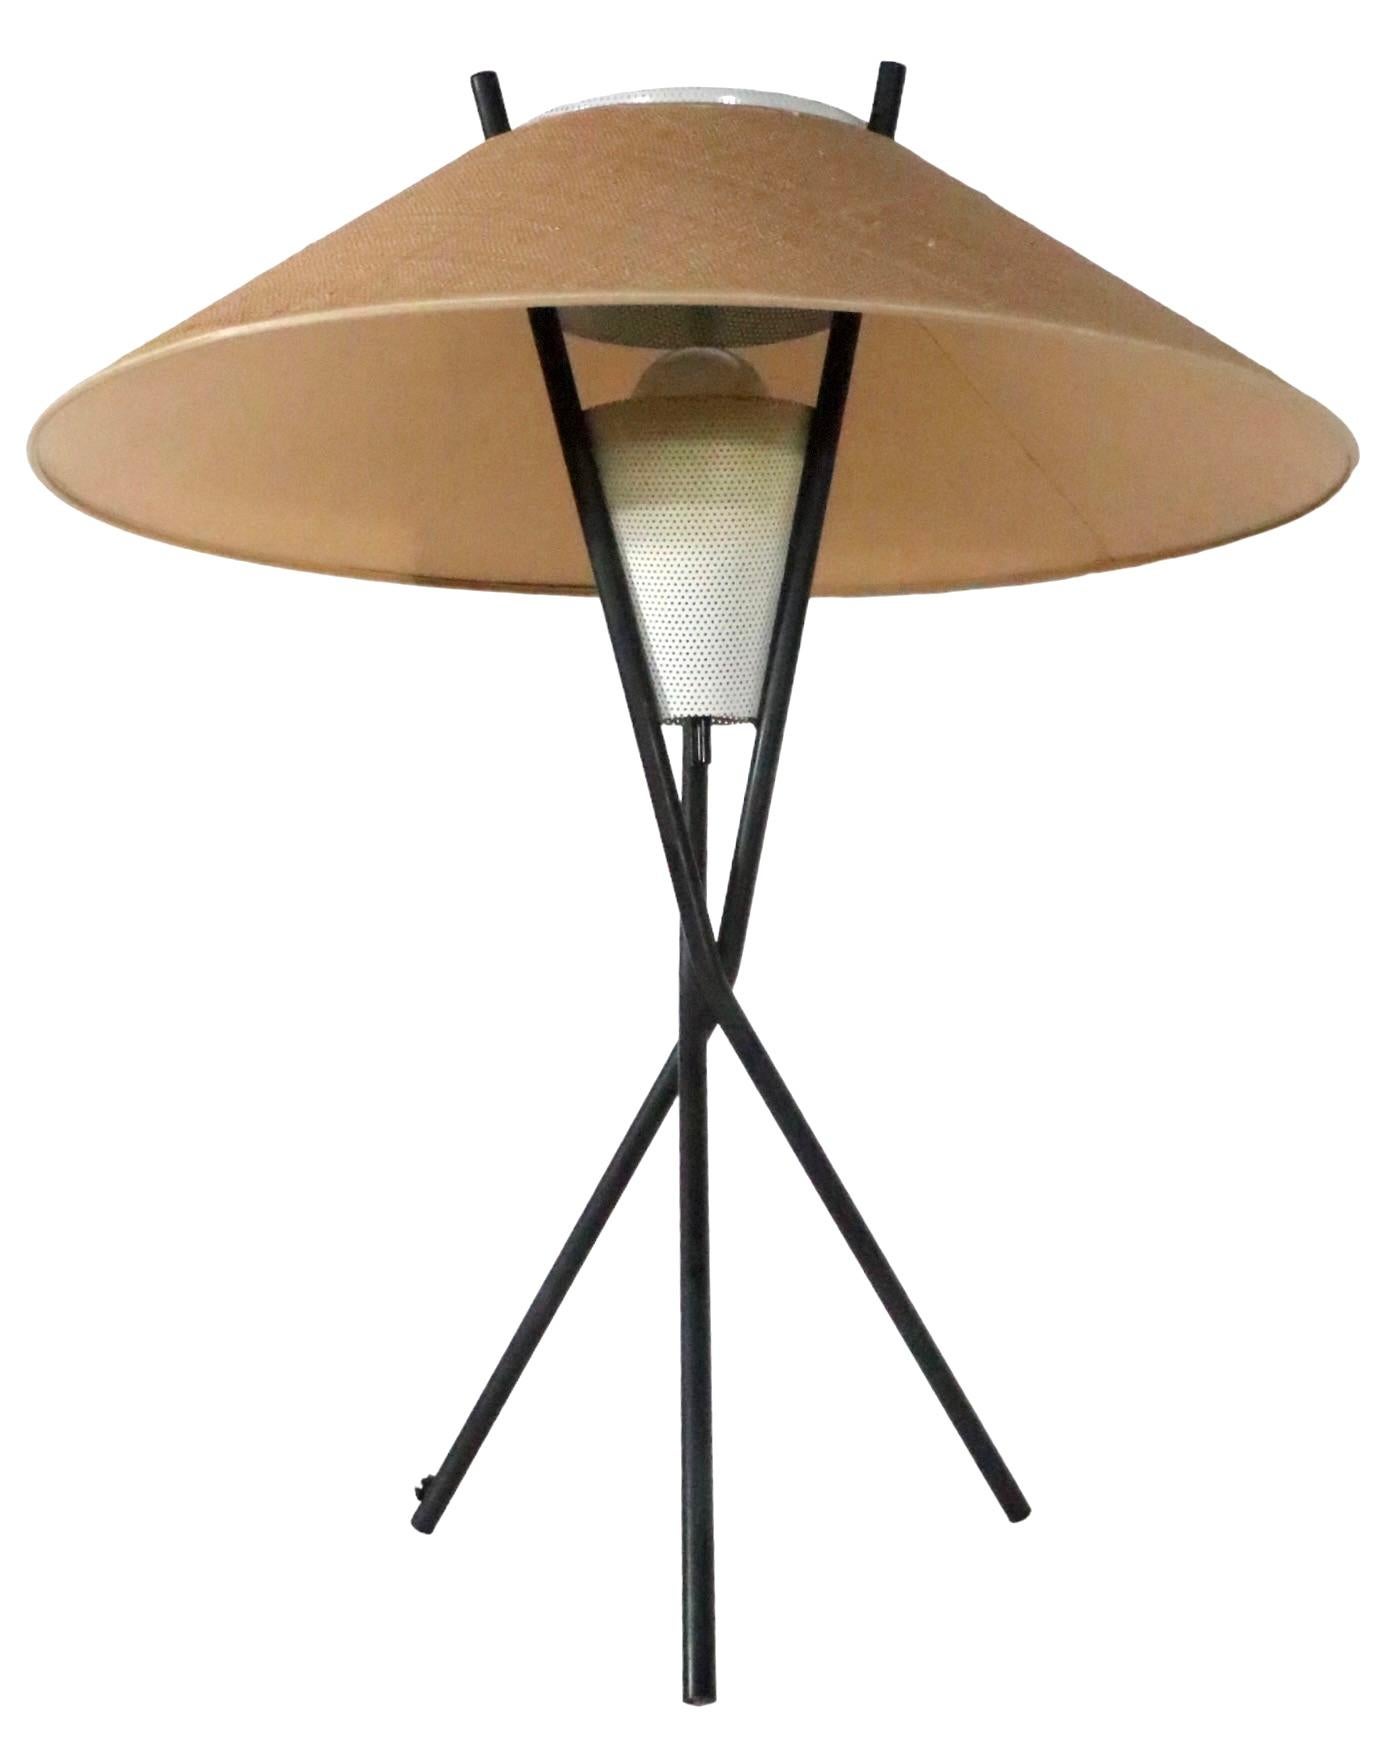 Metal Midcentury Tri Pod Table Lamp by Gerald Thurston for Lightolier C 1950s For Sale